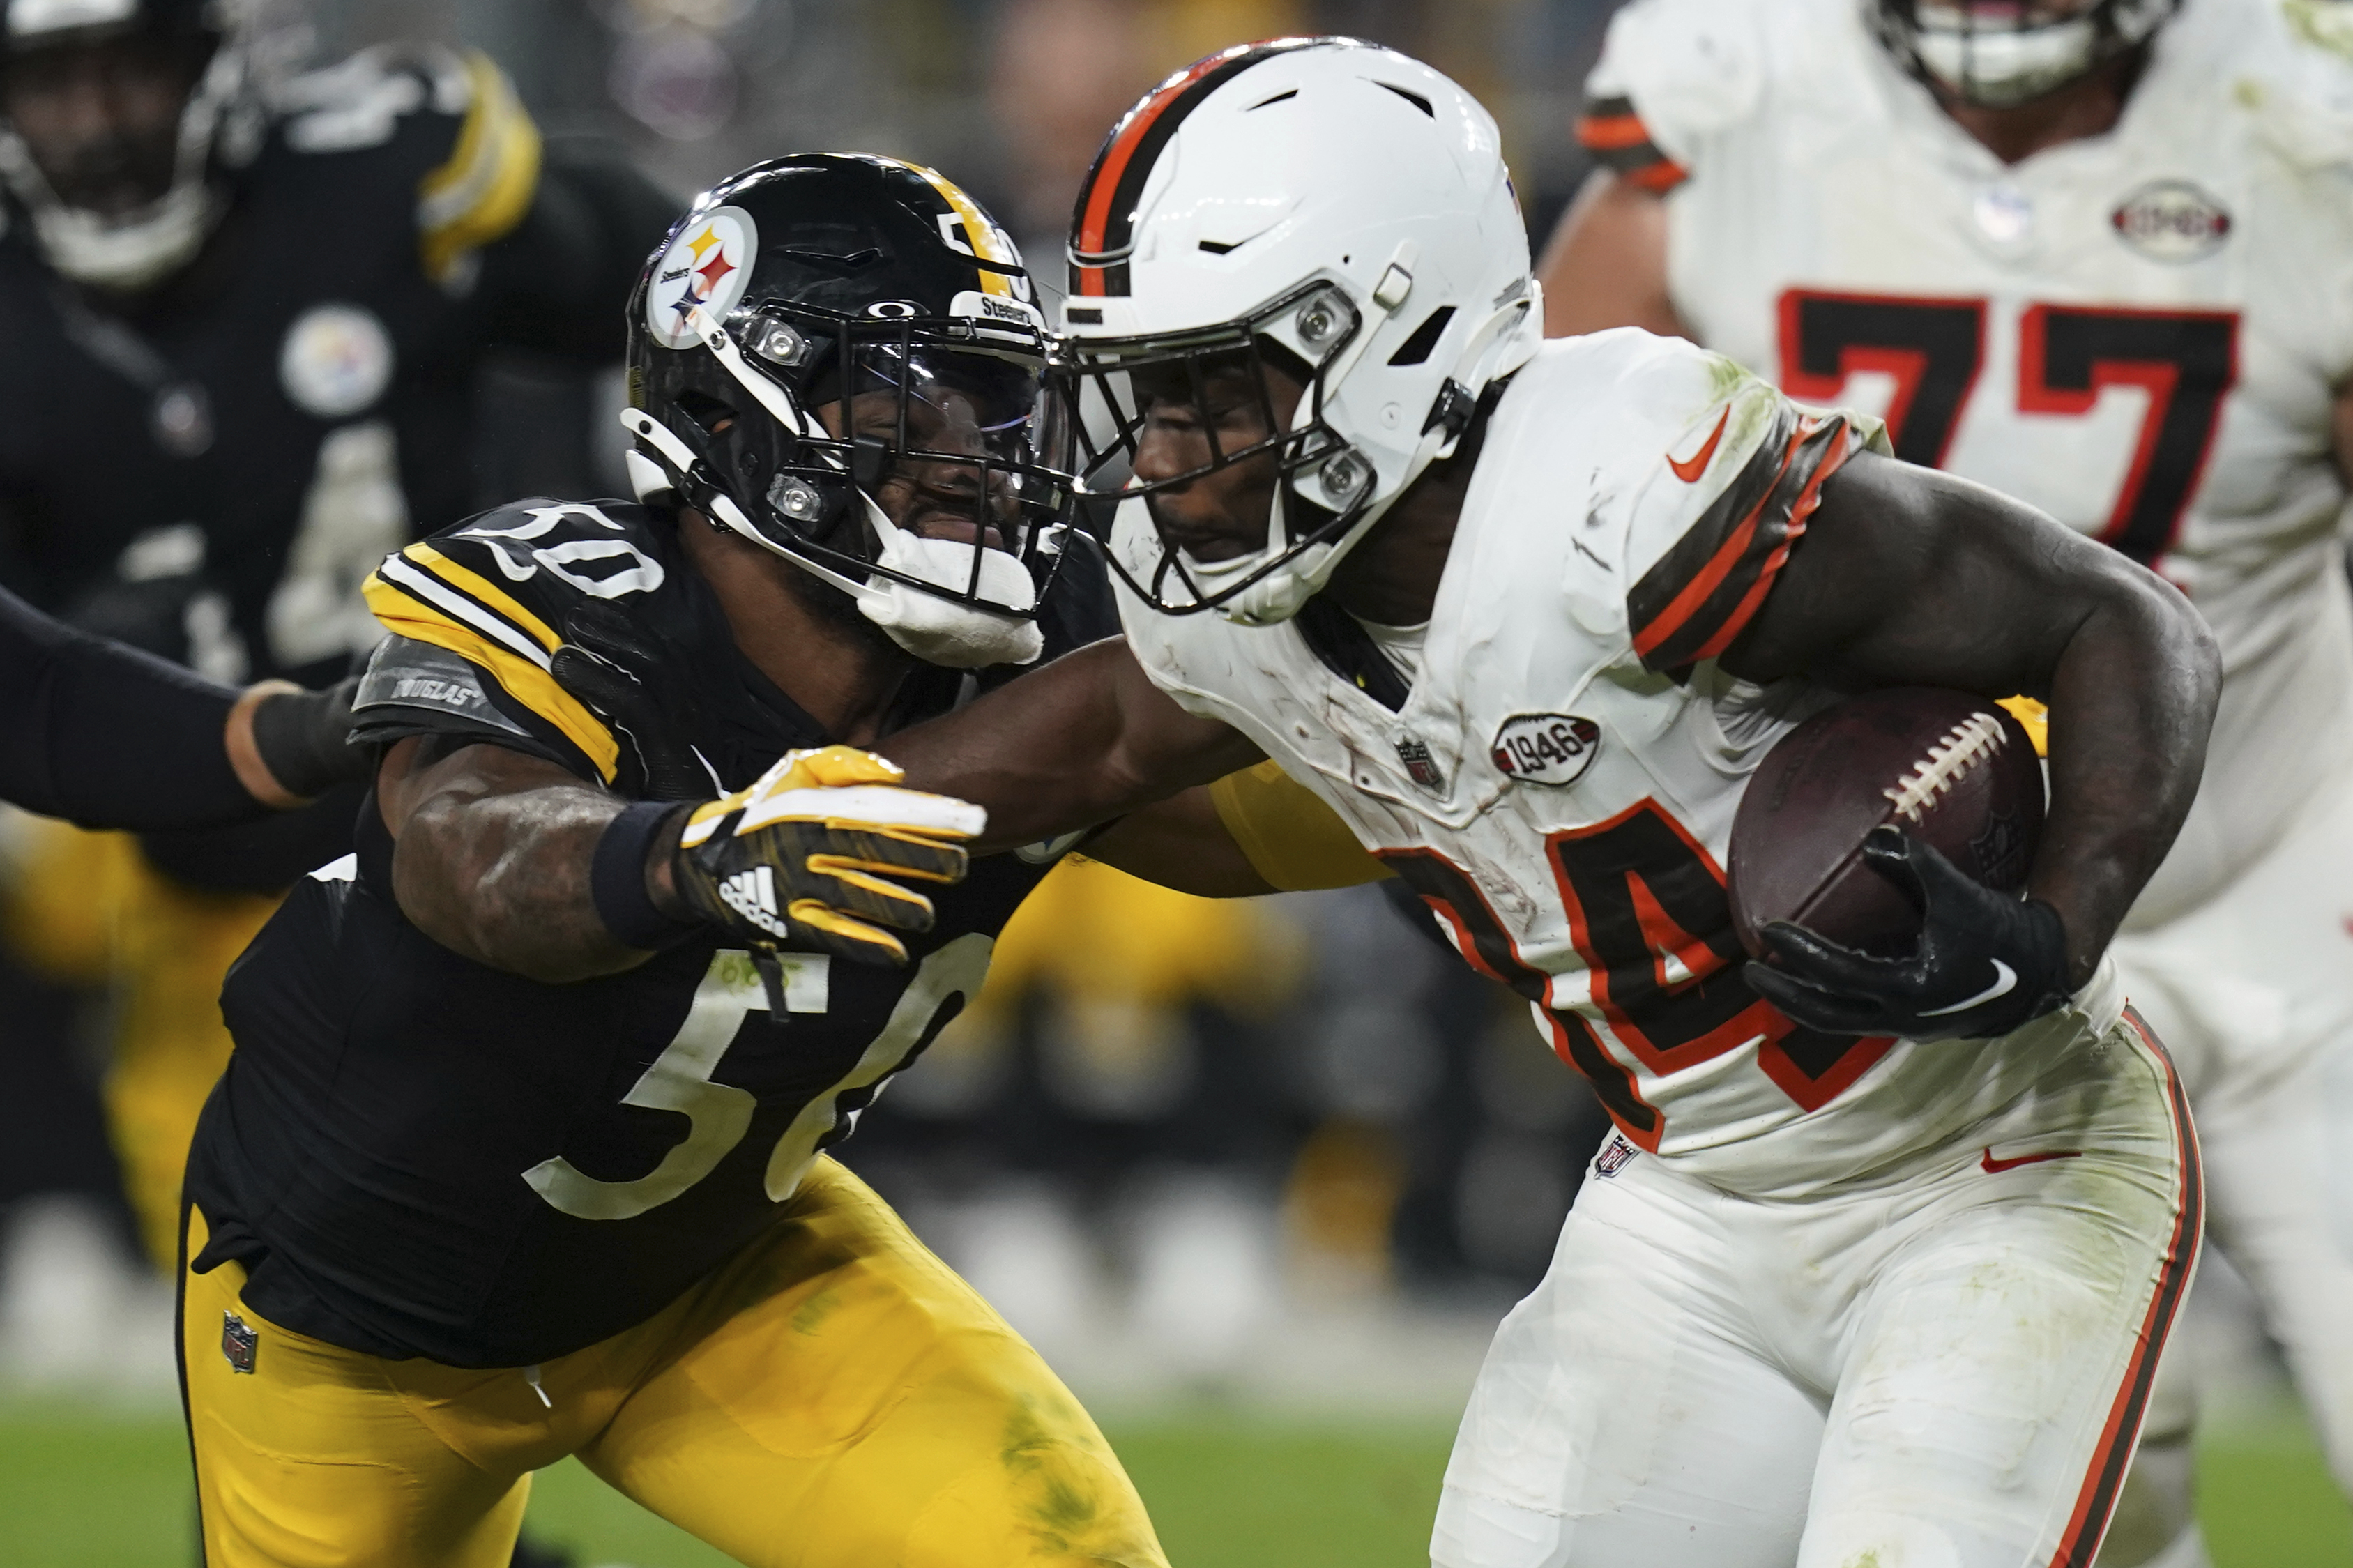 T.J. Watt's scoop-and-score lifts Steelers past Browns 26-22 as Cleveland  loses Nick Chubb to injury - The San Diego Union-Tribune